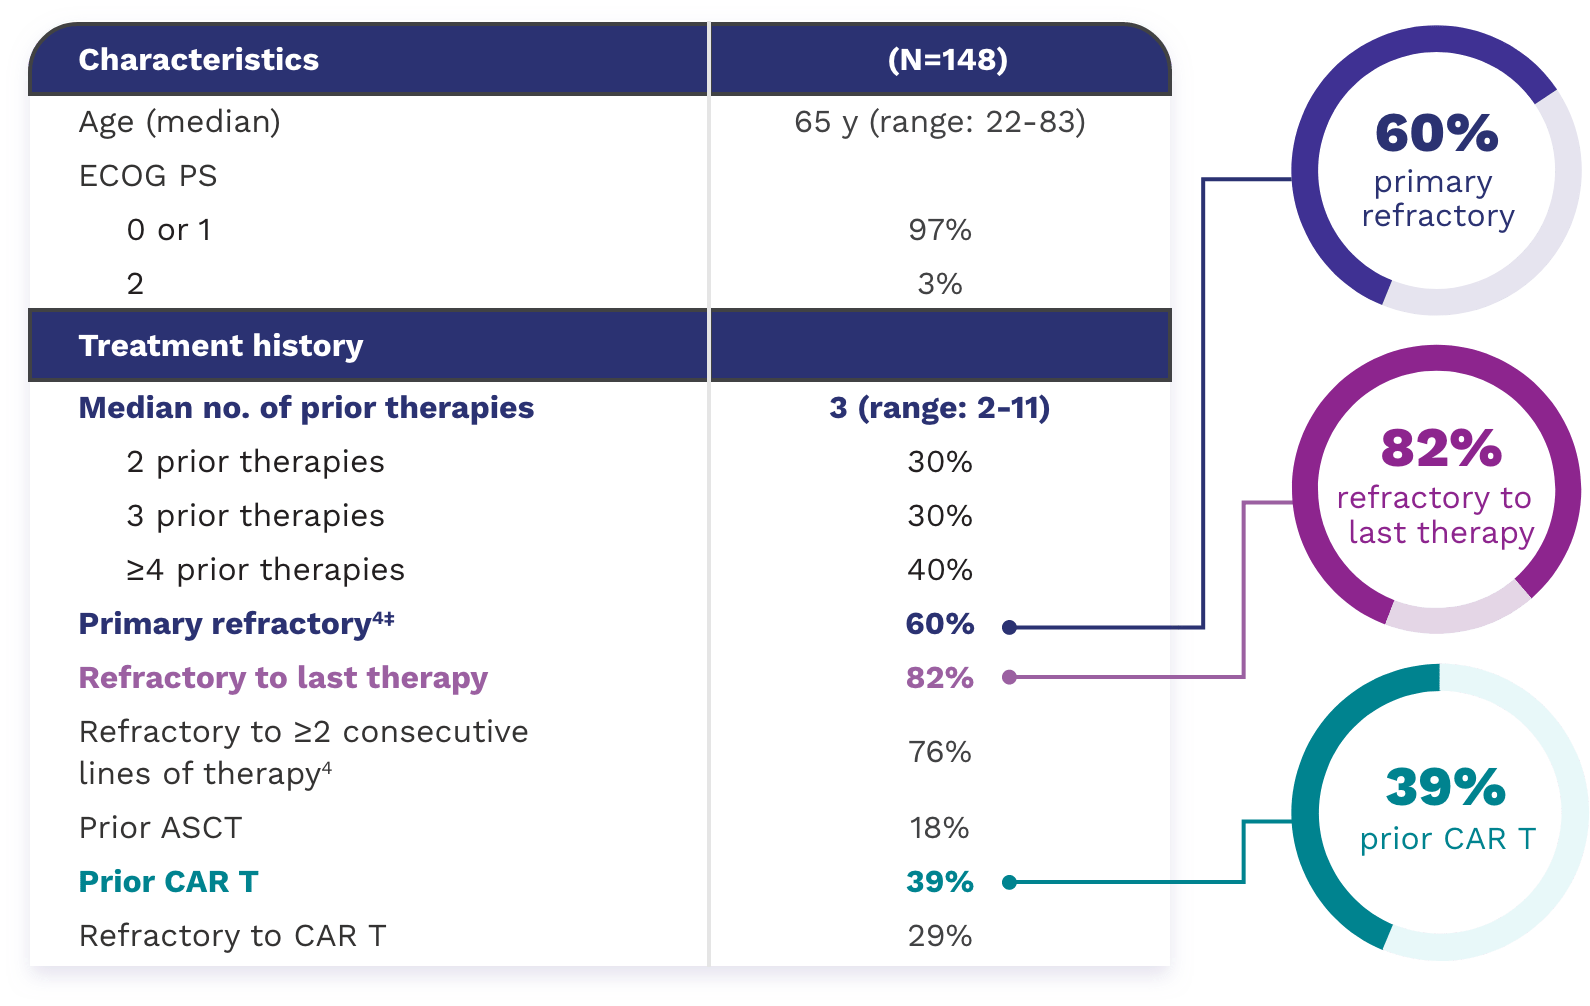 EPKINLY™ was studied across 22­-83 year olds with a median age of 65. 97% of patients received a 0 or 1 and 3% received a 2 performance status from Eastern Cooperative Oncology Group. Patients had varying treatment history: median number of prior therapies was 3. 30% had 2 prior therapies, 30% had 3 prior therapies and 40% had 4 or more prior therapies. 60% of patients were primary refractory, 82% were refractory to last therapy and 39% were prior CAR T.